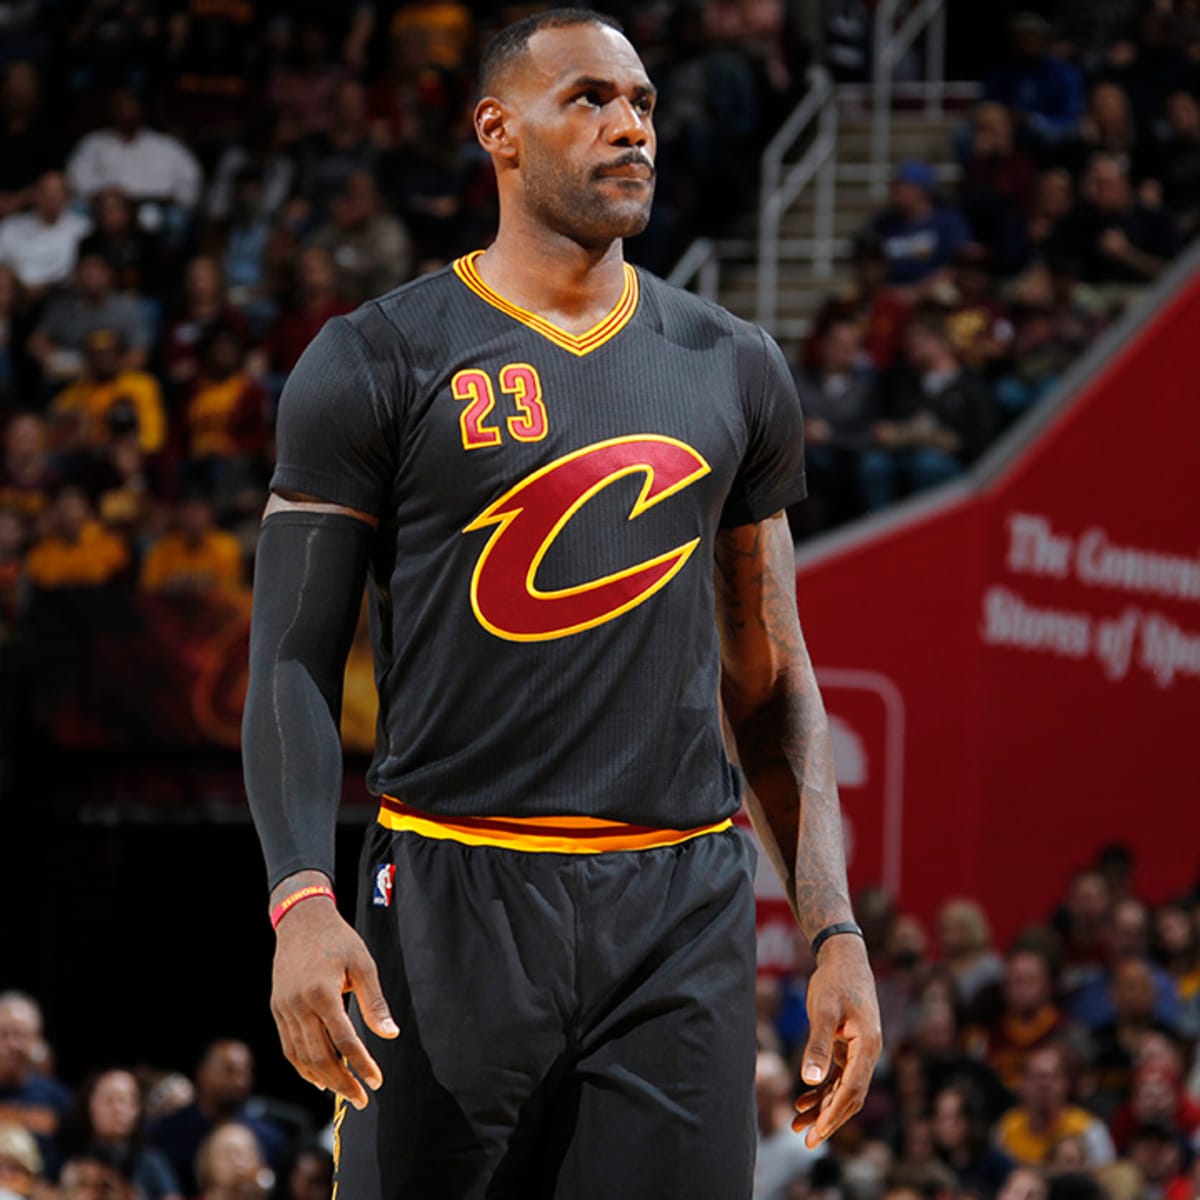 Cleveland Cavaliers: LeBron James rips jersey sleeves during game